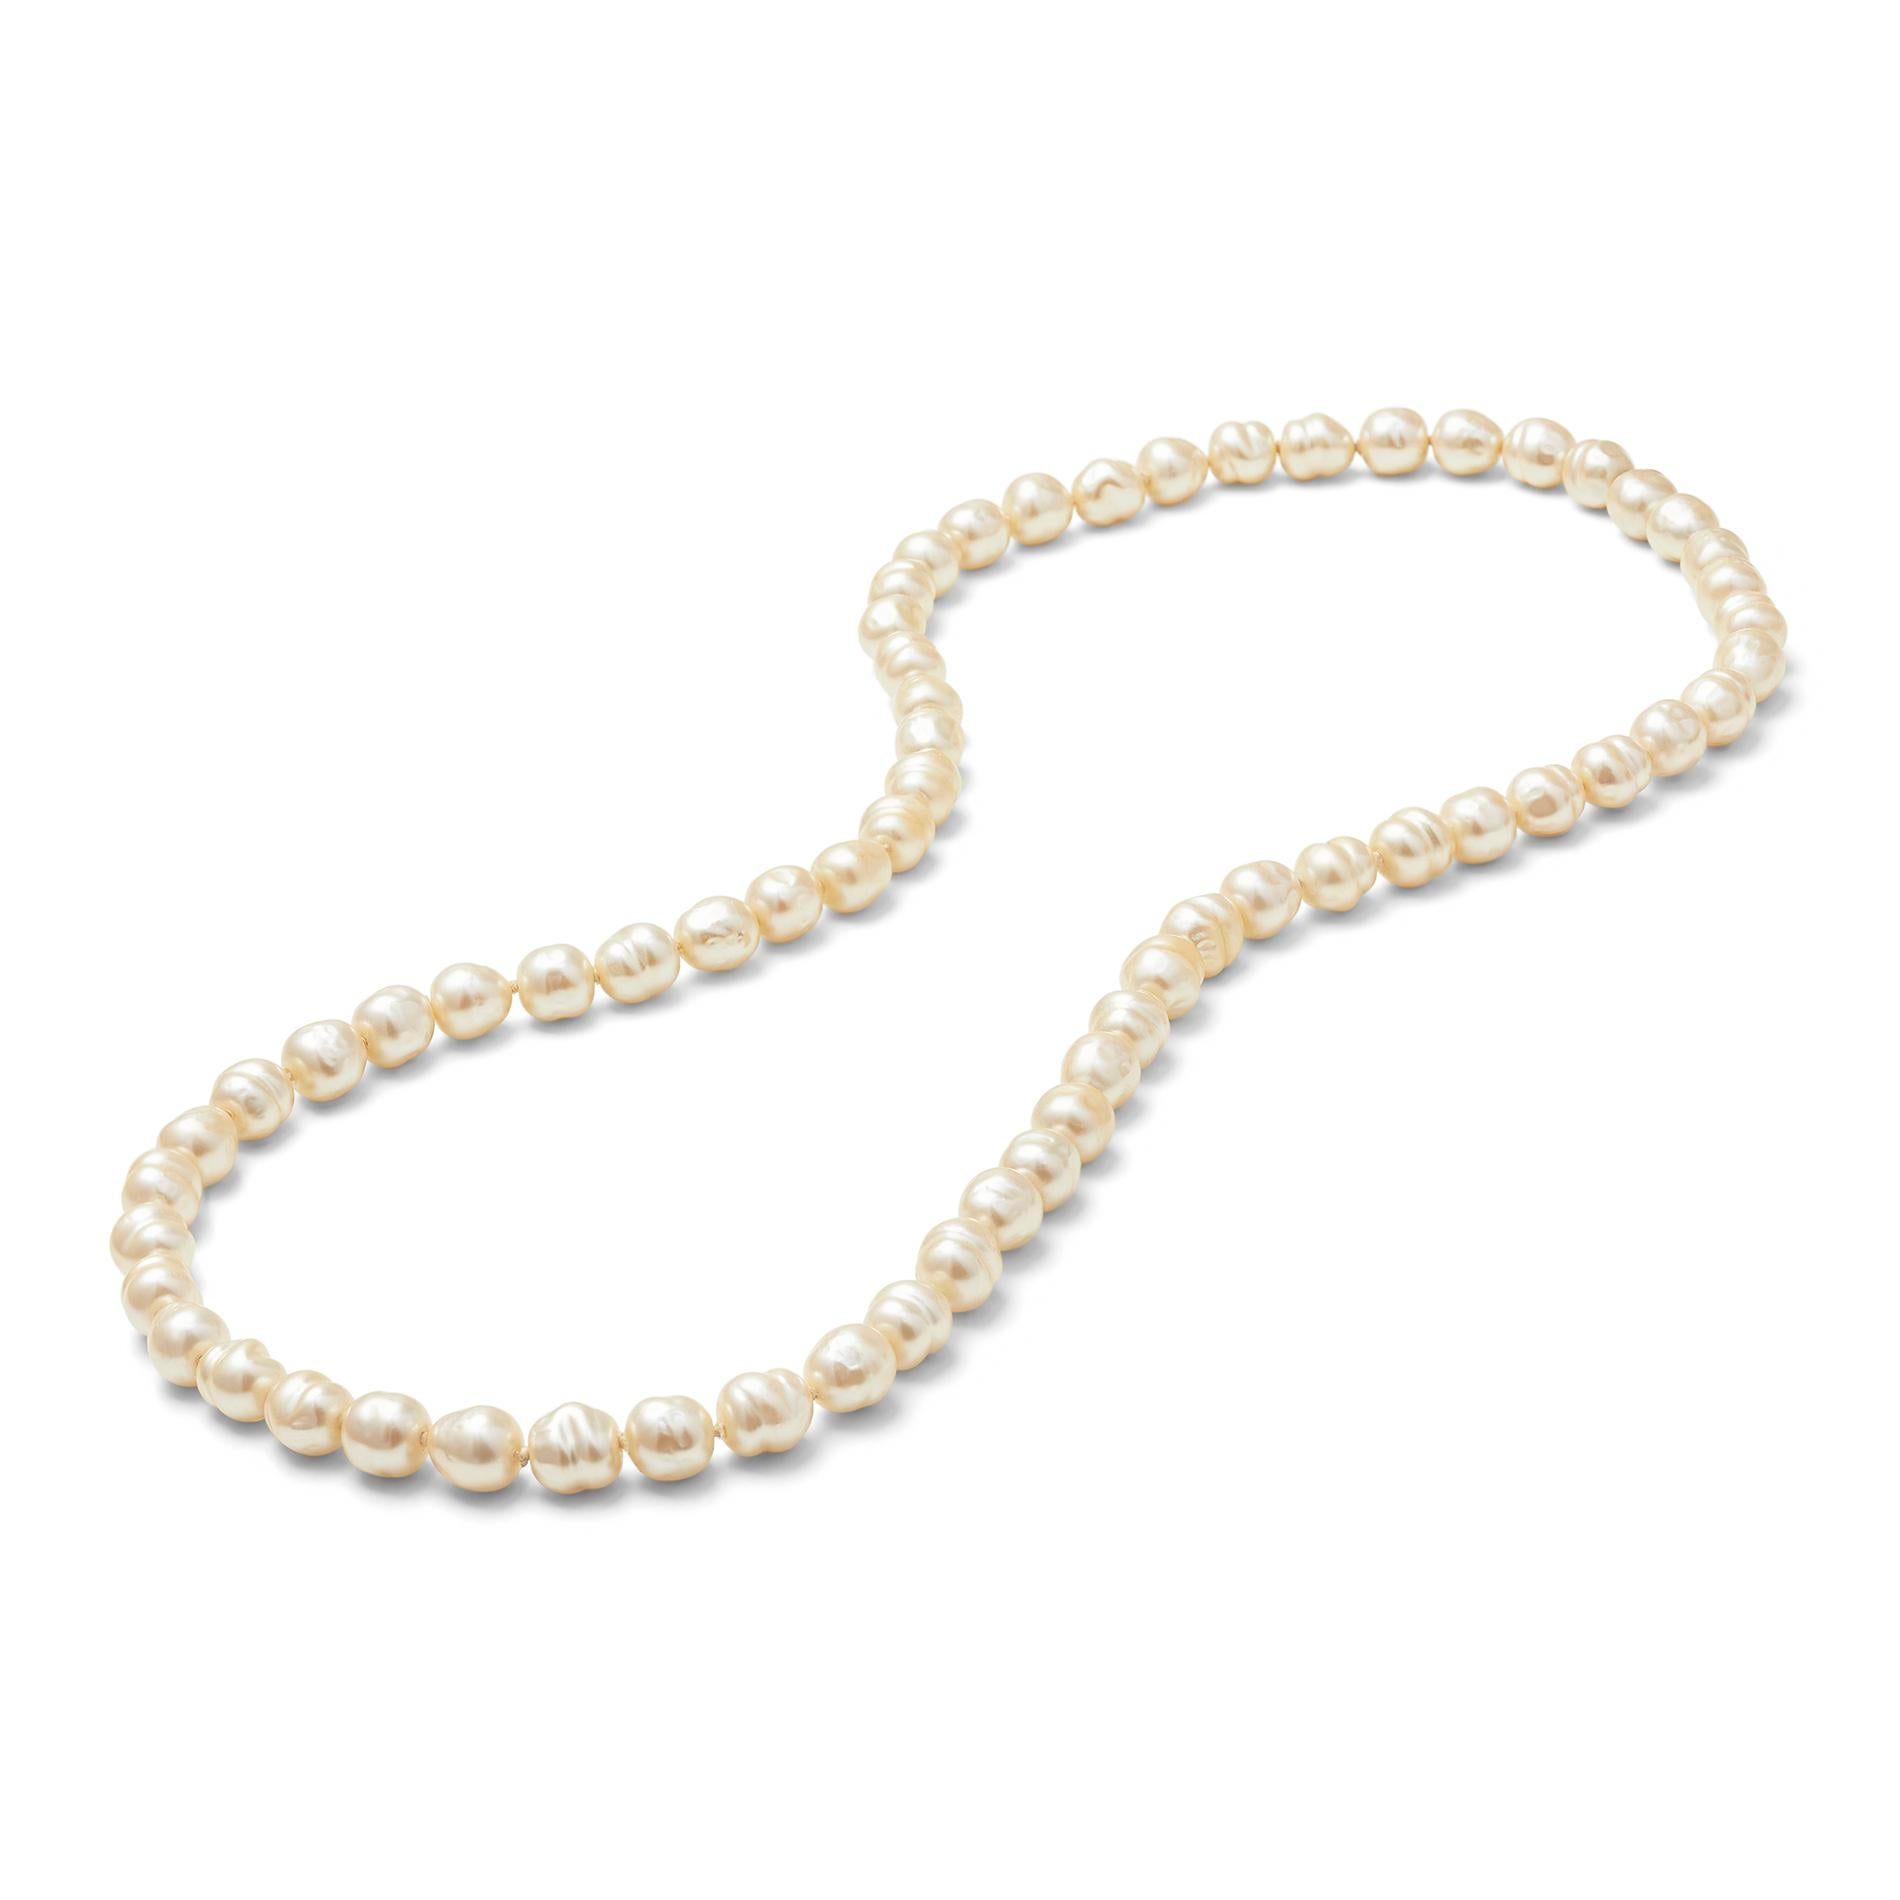 1980s Chanel champagne colour Baroque style simulated pearl necklace. From the early part of the decade before Karl Lagerfeld and Victoire de Castellane were the creative directors for the House in fashion and jewellery respectively. This